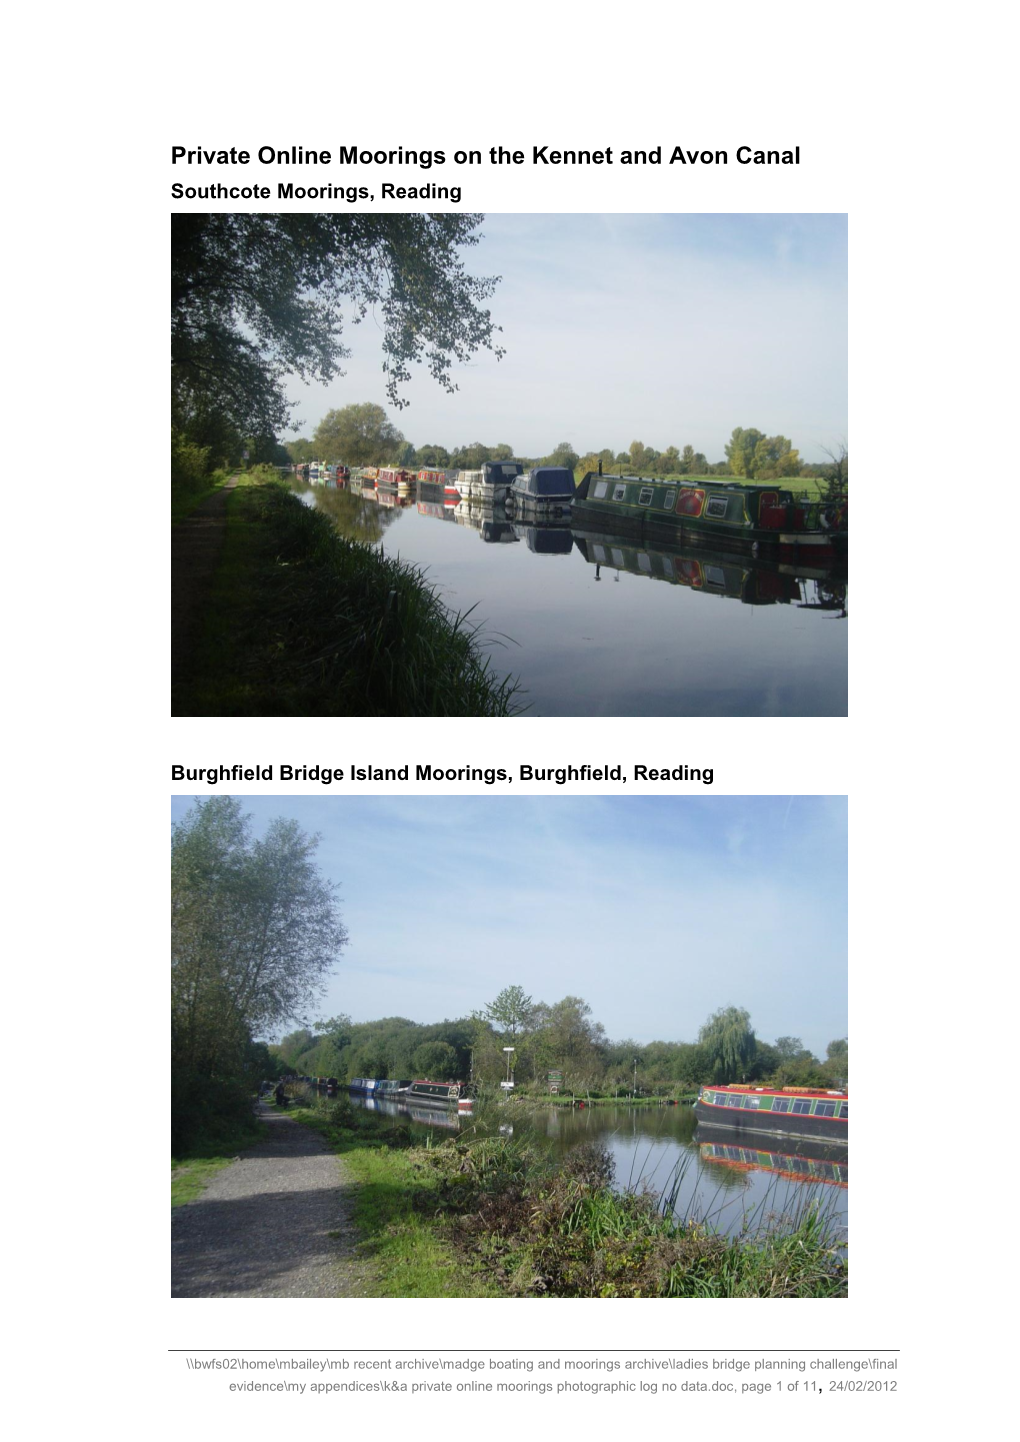 Private Online Moorings on the Kennet and Avon Canal Southcote Moorings, Reading